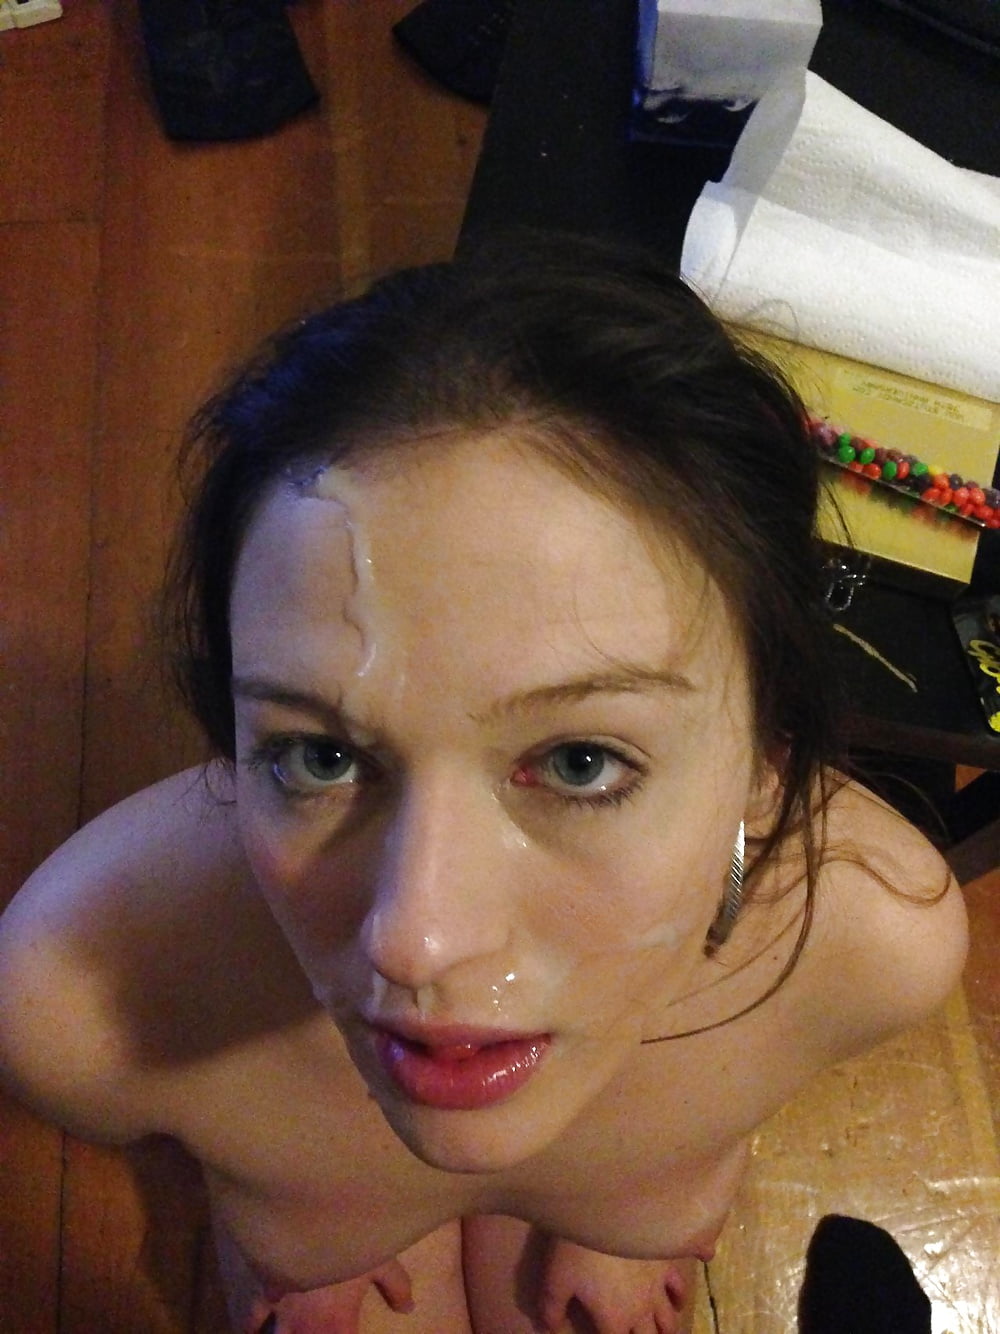 Free Favorite Amateur Hotwives and Girlfriends - Facials 10 photos